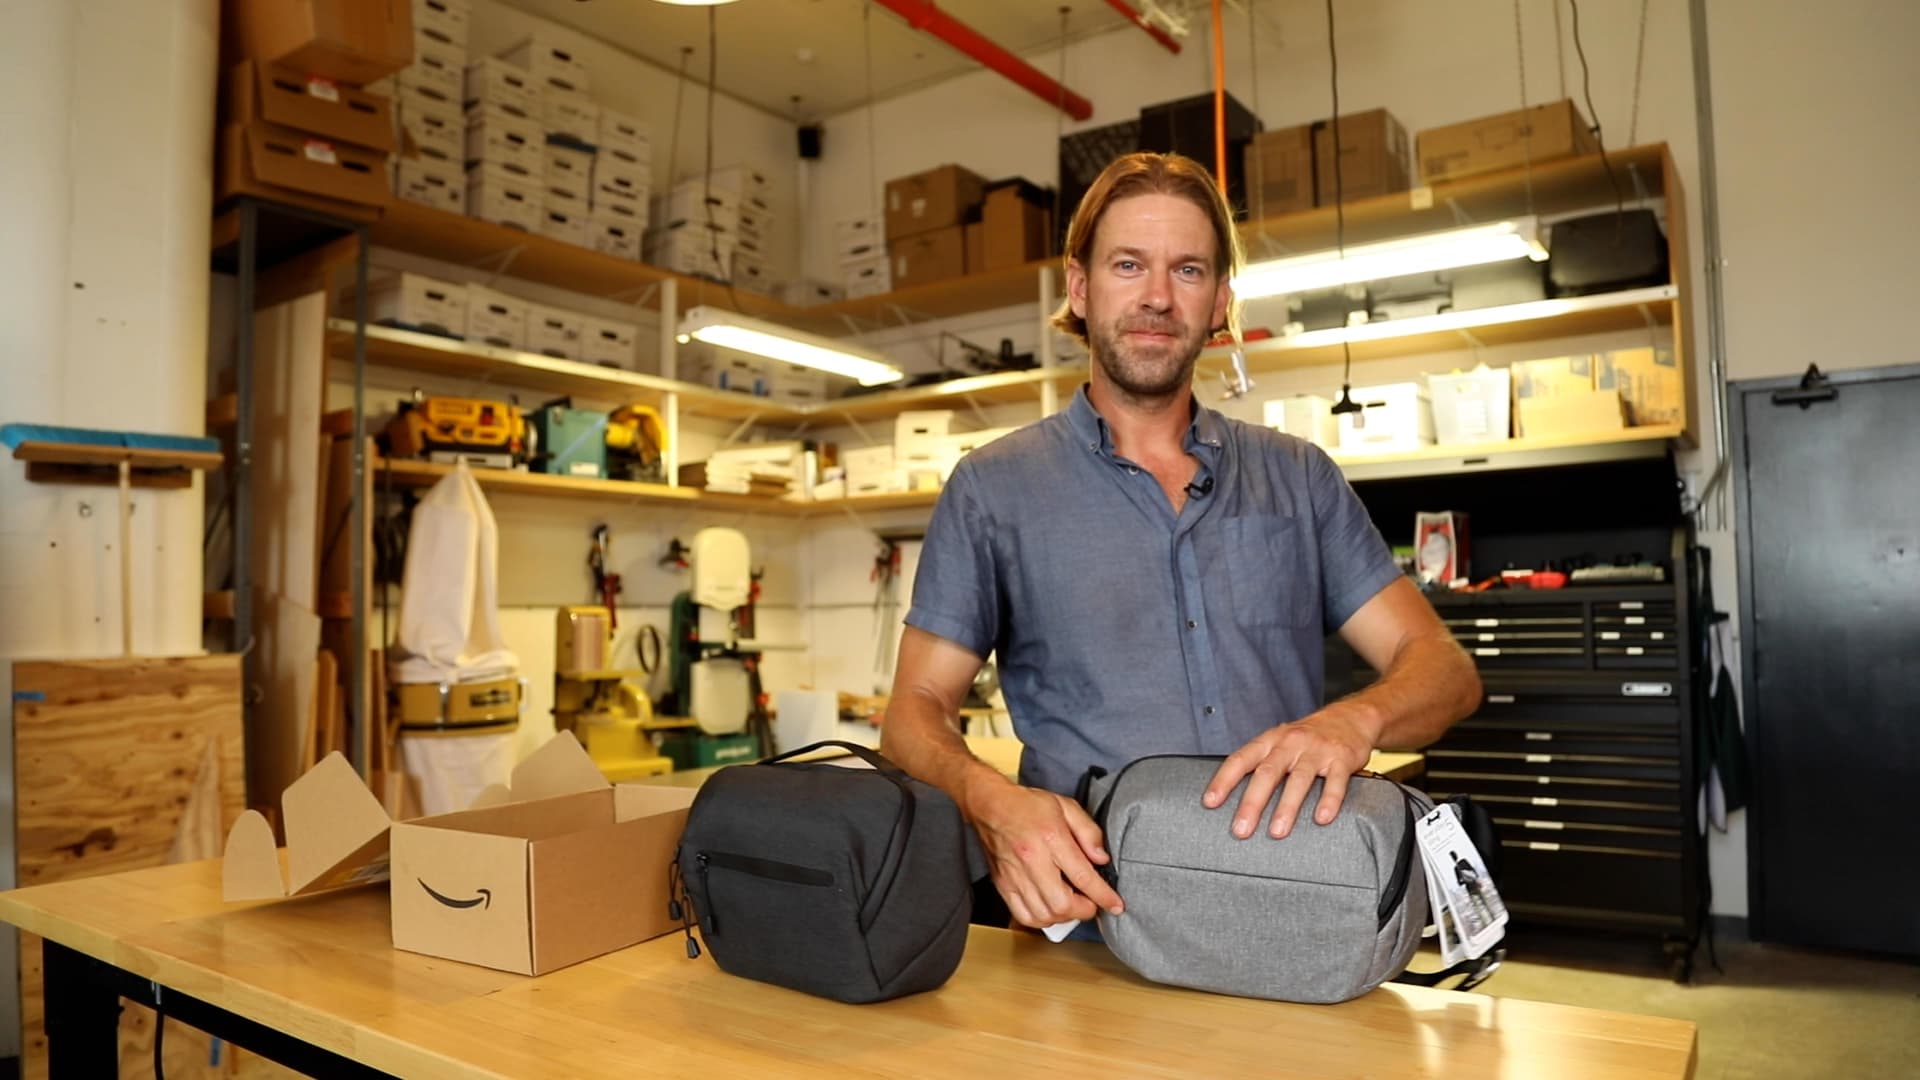 Peak Design CEO Peter Dering compares his company's Everyday Sling Bag to the Amazon private label version at his San Francisco headquarters on September 6, 2022.